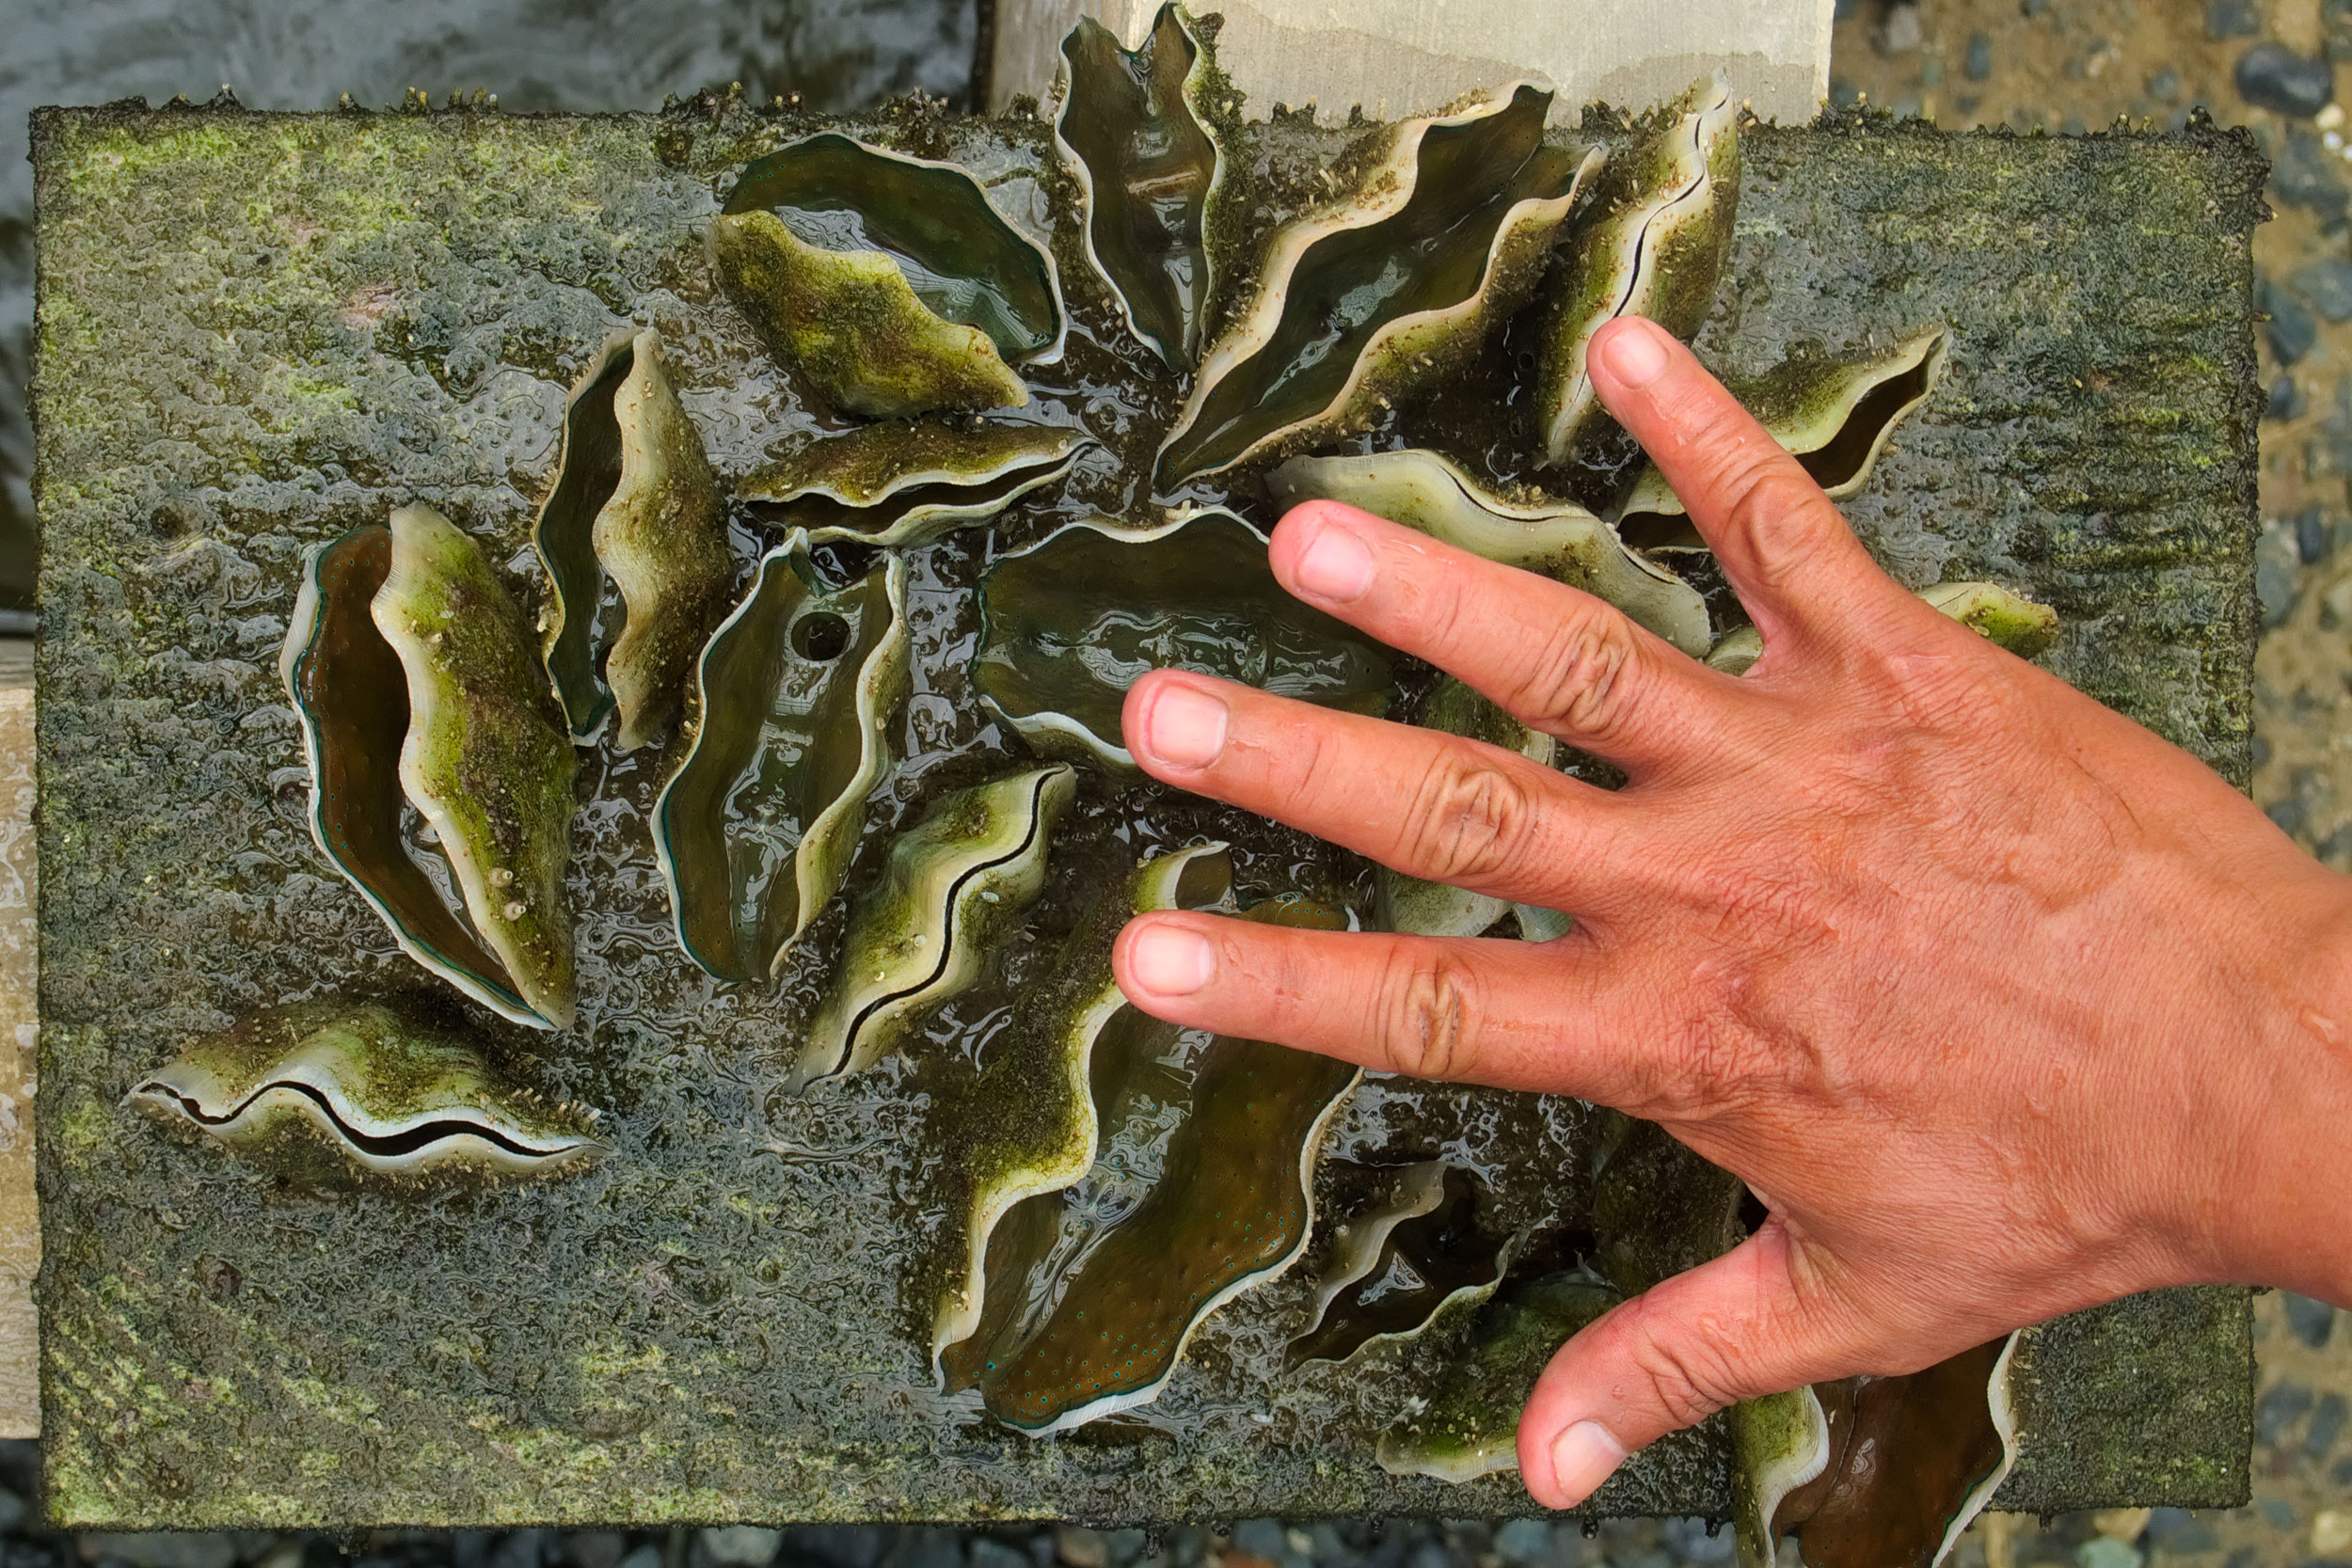 are giant clams edible